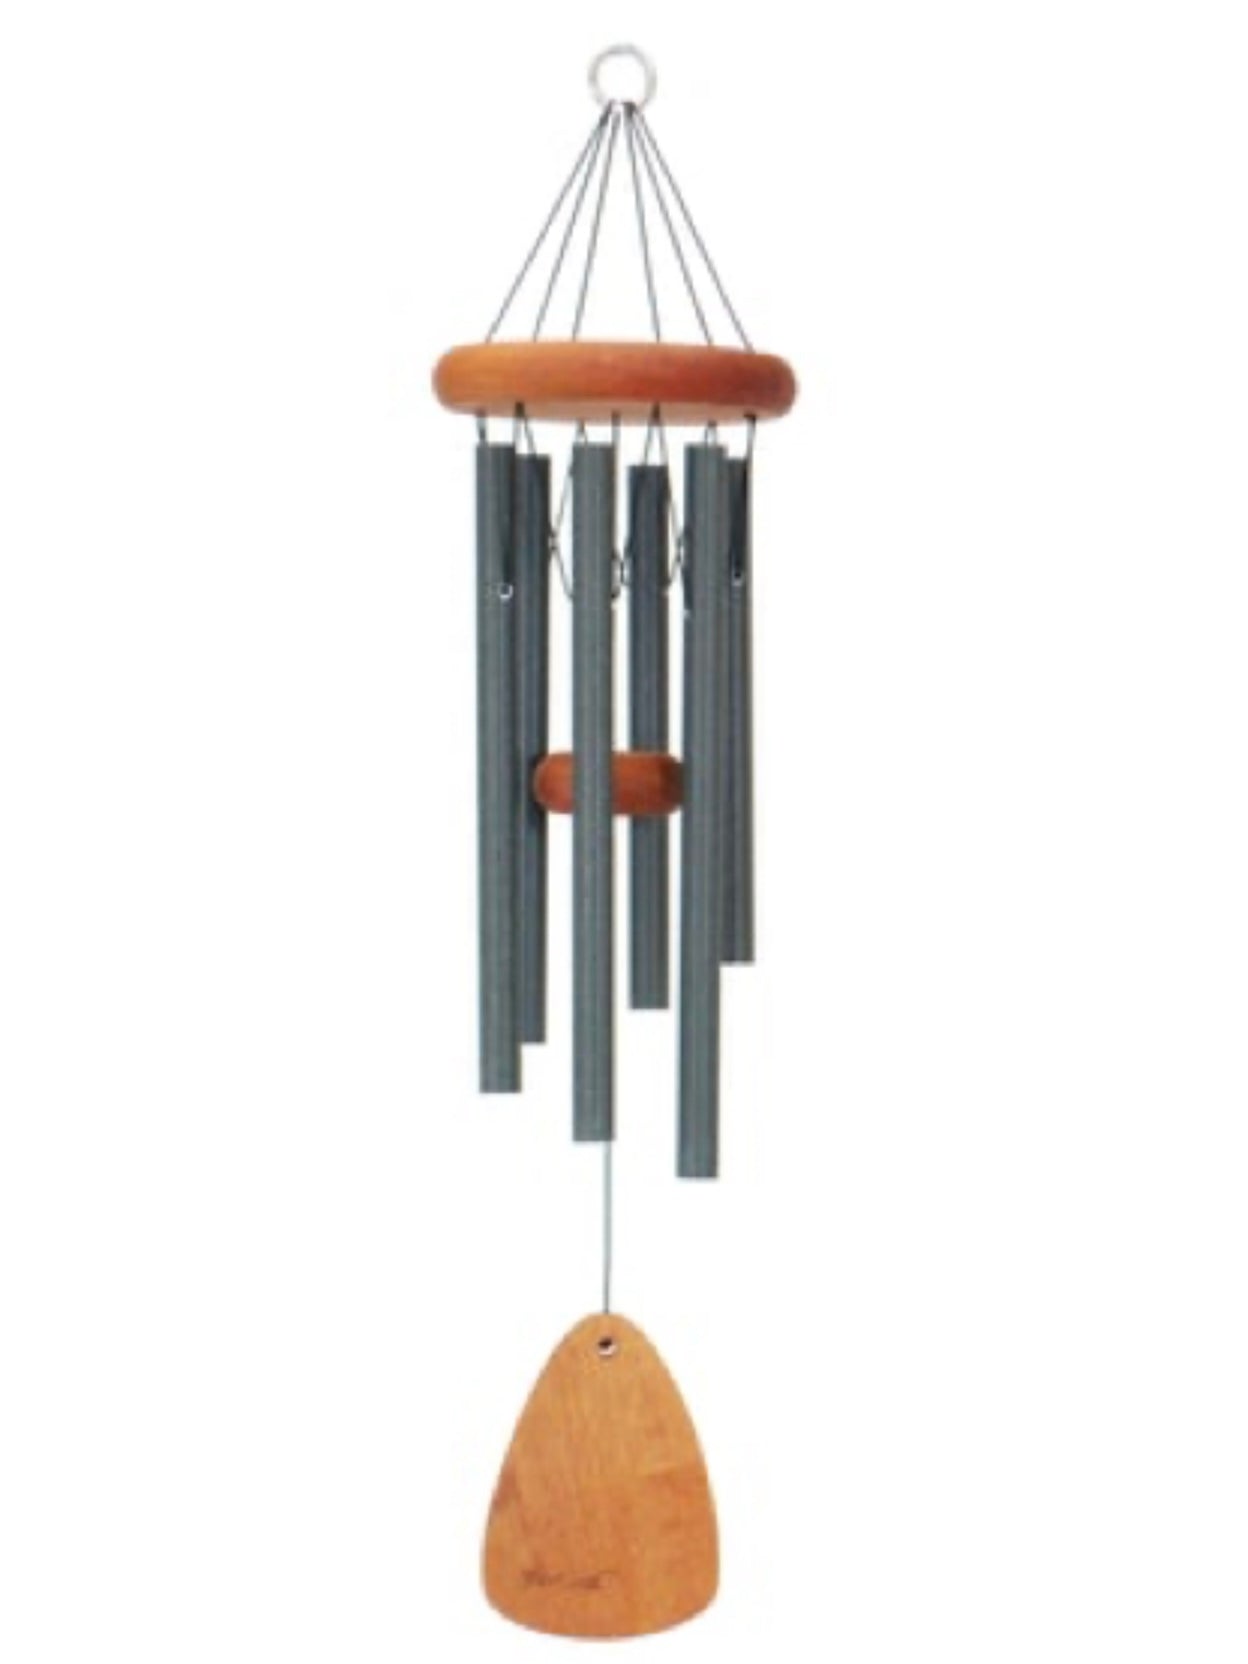 Festival ® 24-inch w/ 6 tubes Wind Chime Forest Green